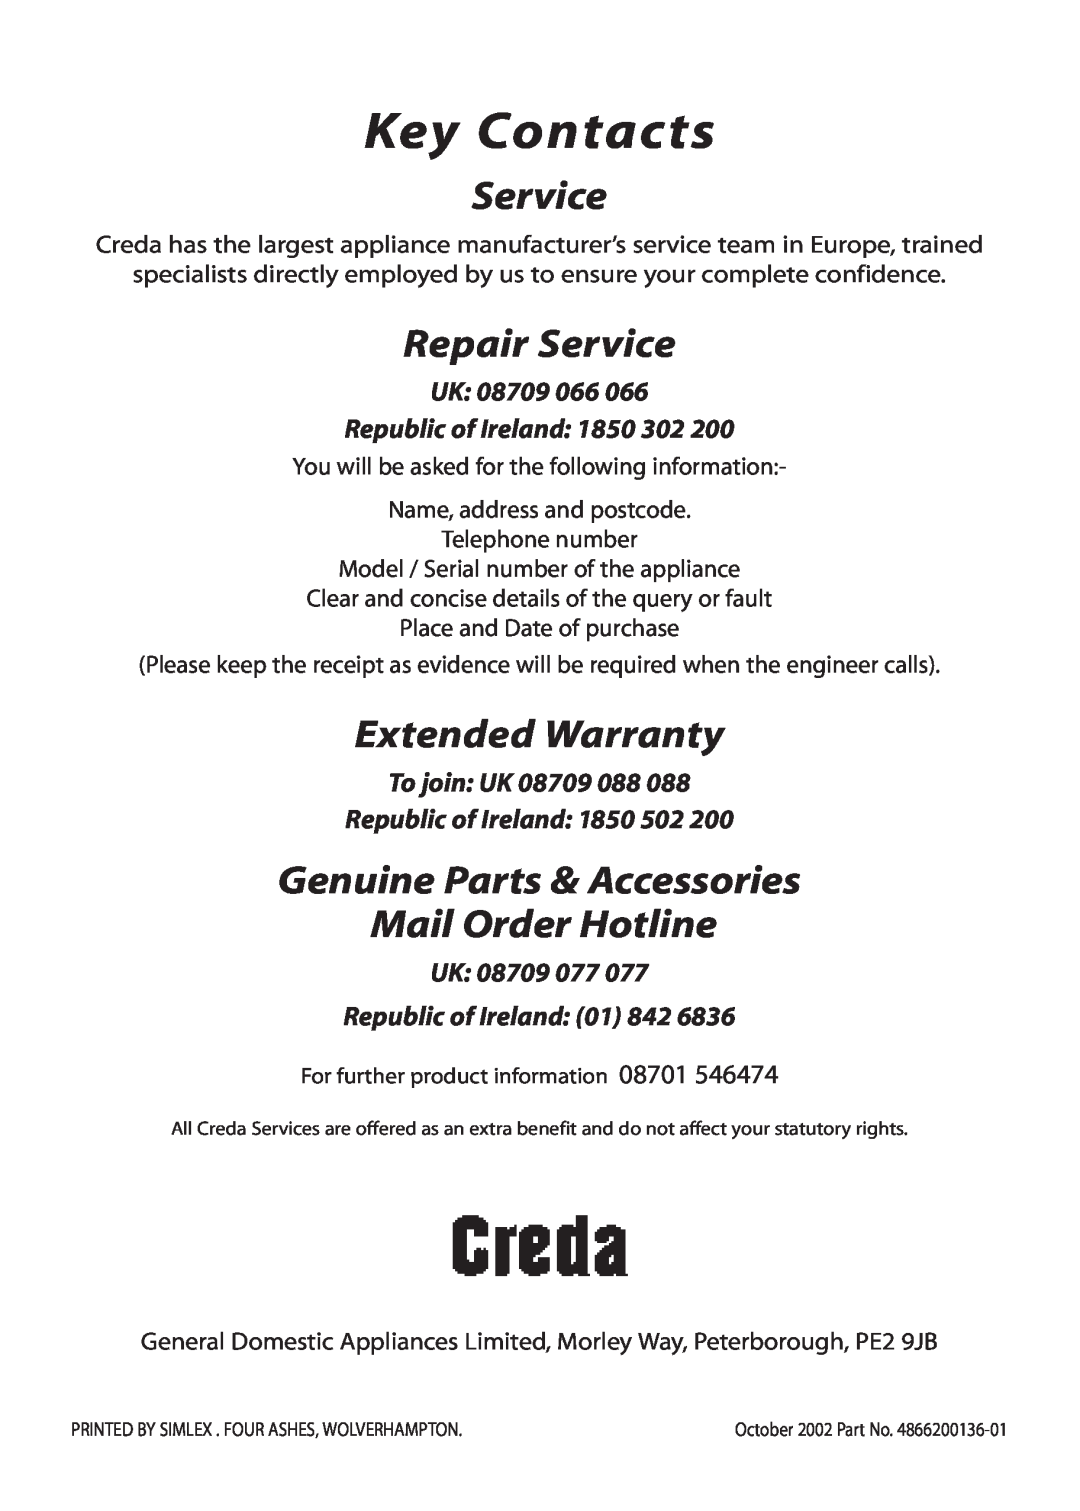 Creda Double Oven Key Contacts, Repair Service, Extended Warranty, Genuine Parts & Accessories Mail Order Hotline 